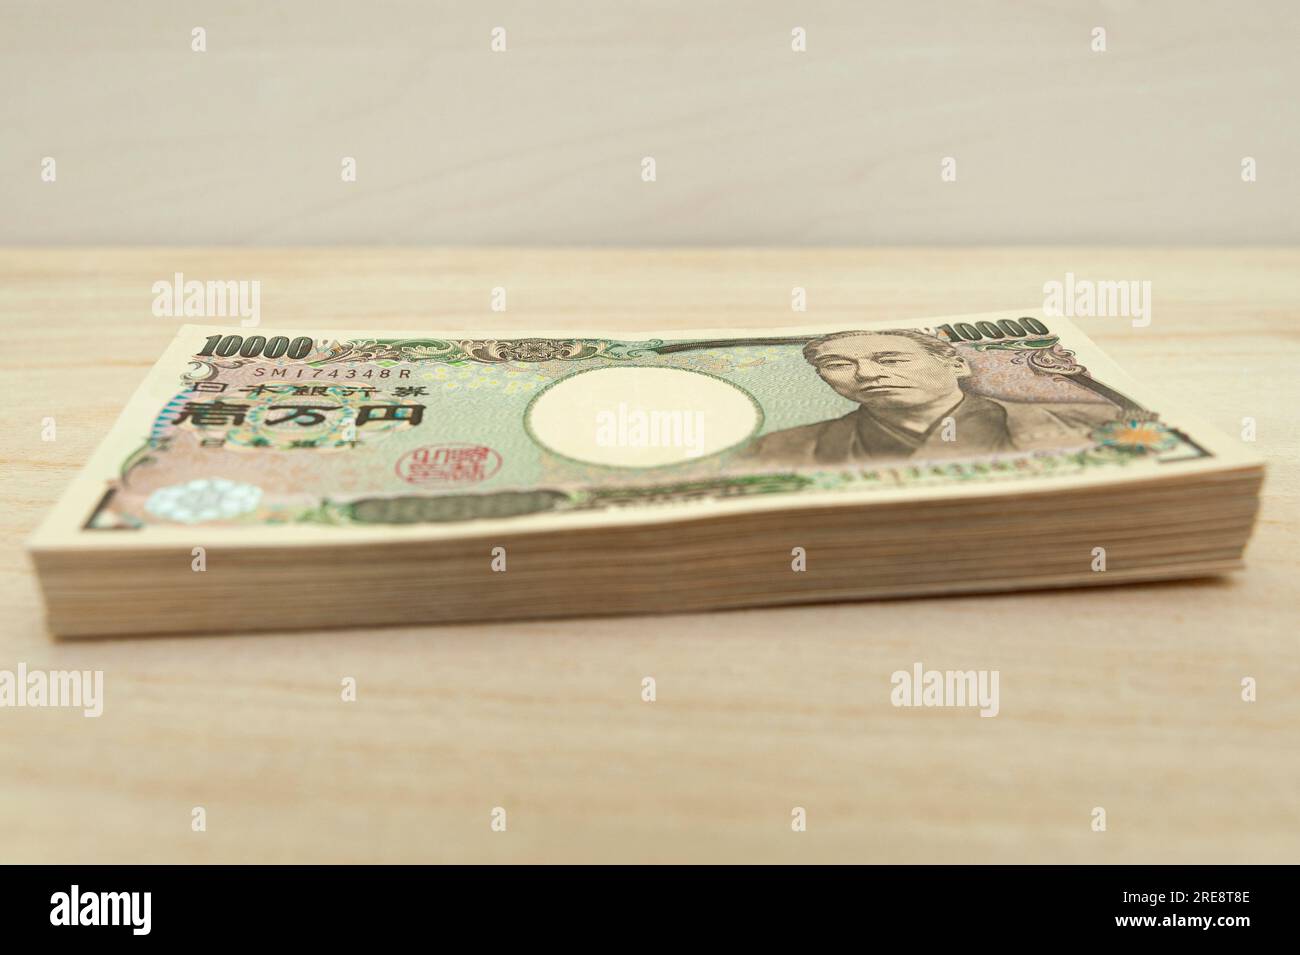 Ten thousand yen (10,000 yen) banknotes stacked. Japanese money. Paper money. isolated on wooden table. Side view. Stock Photo